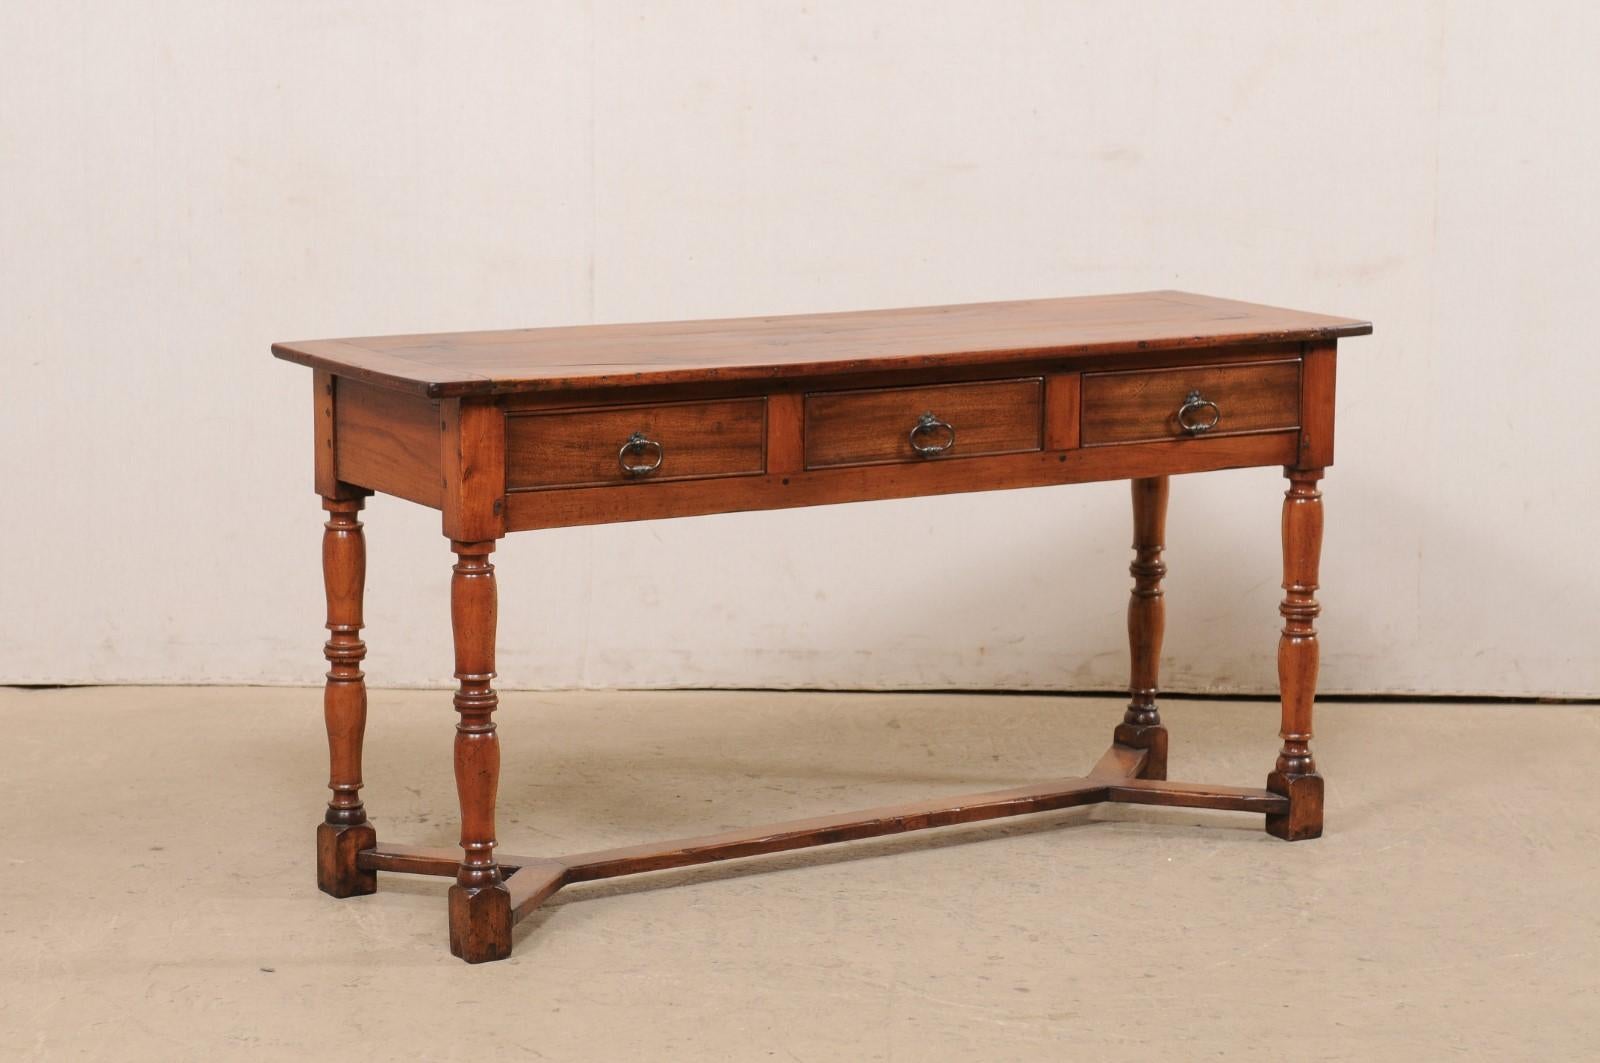 An English carved wood console table with drawers from the 19th century. This antique table from England features a rectangular-shaped top over a case which houses three small drawers, set horizontally along the front, and is presented upon four